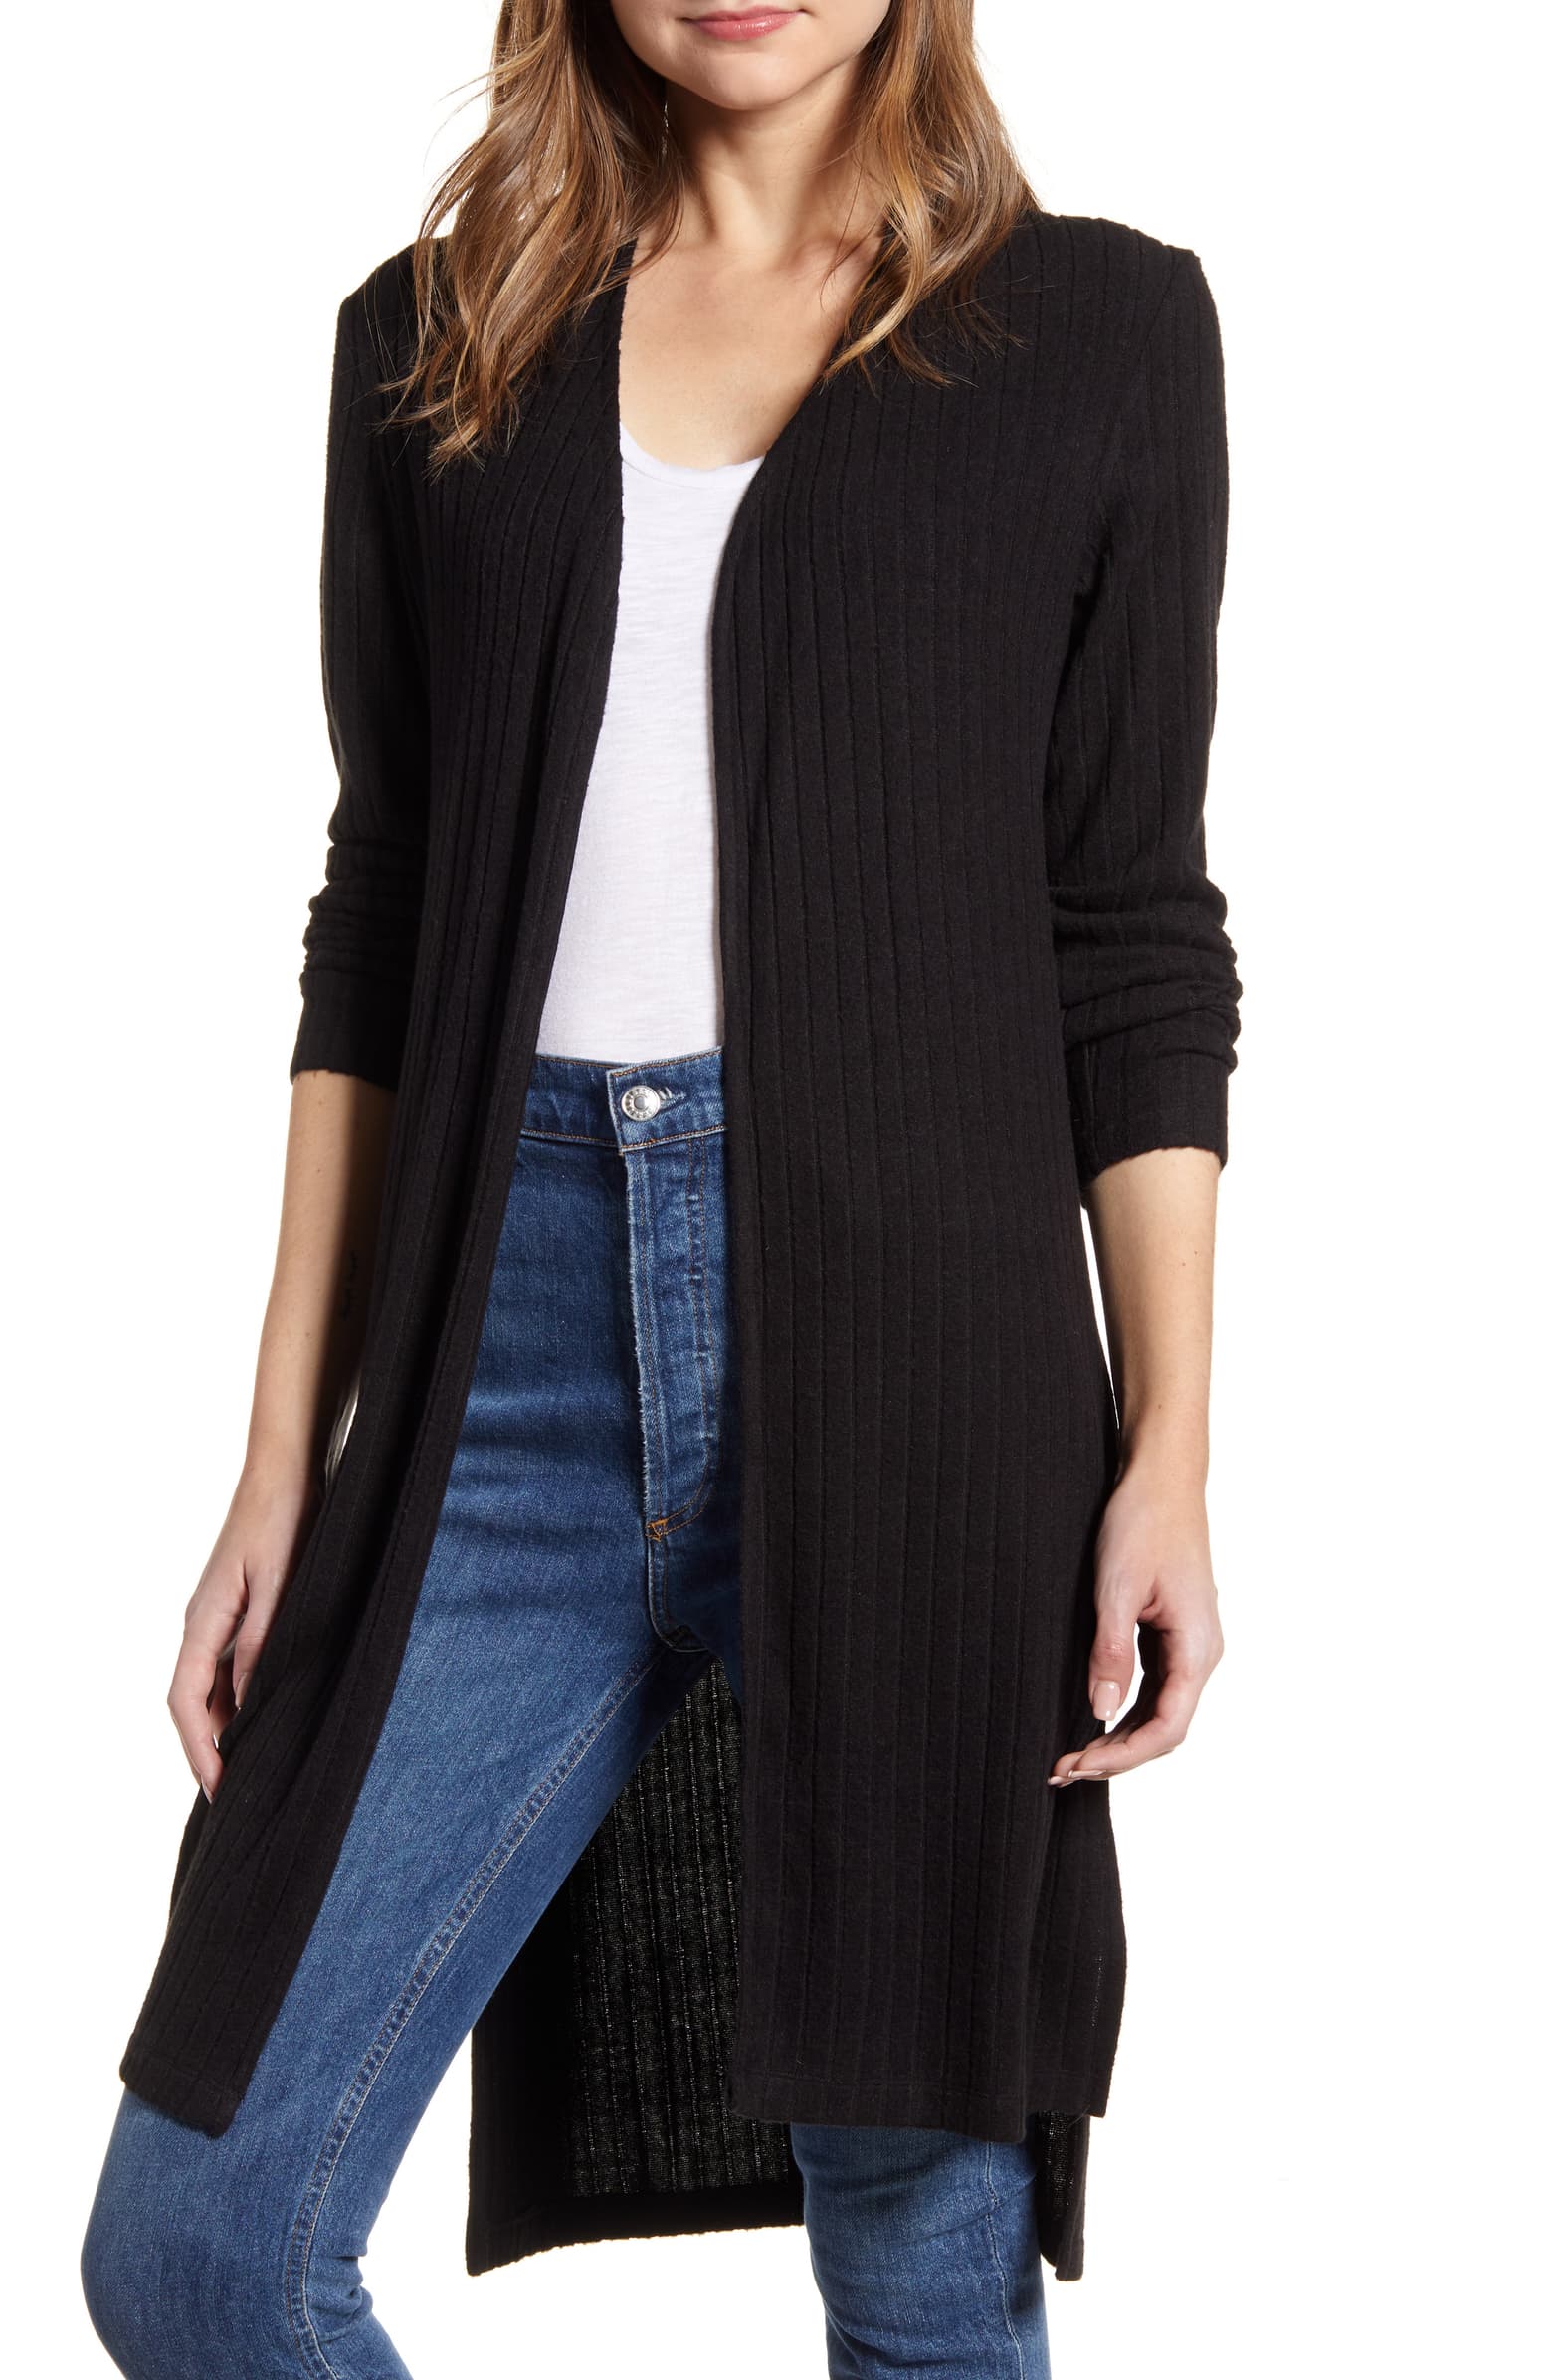 Add This Soft, Comfy Sweater To Your Lounge-At-Home Wardrobe While It’s ...